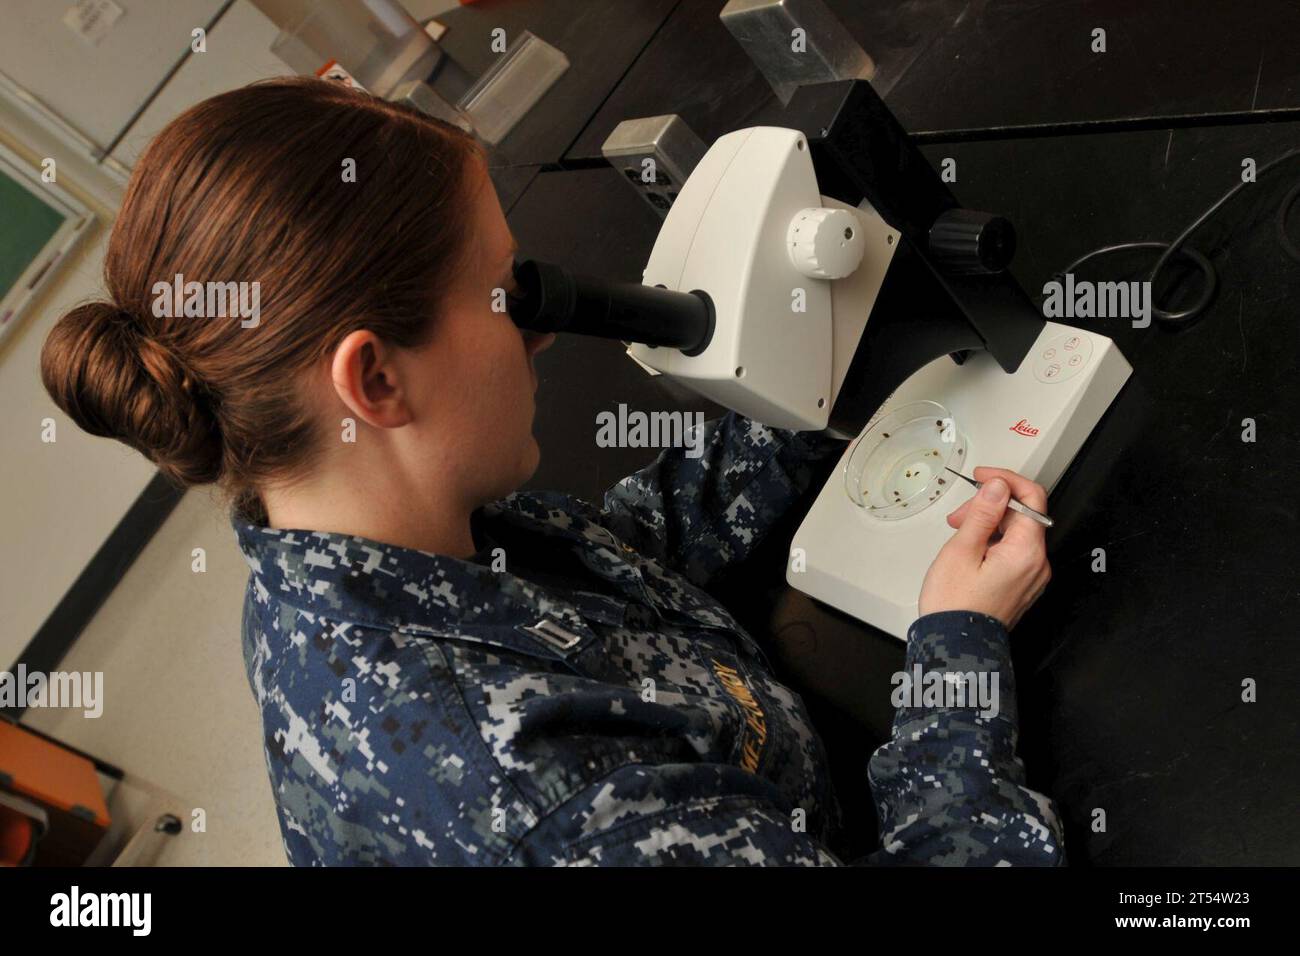 entomologist at the Navy Entomology Center of Excellence at Naval Air Station Jacksonville, examines a sample of bed bugs, insect, navy, research, Science, U.S. Navy Stock Photo